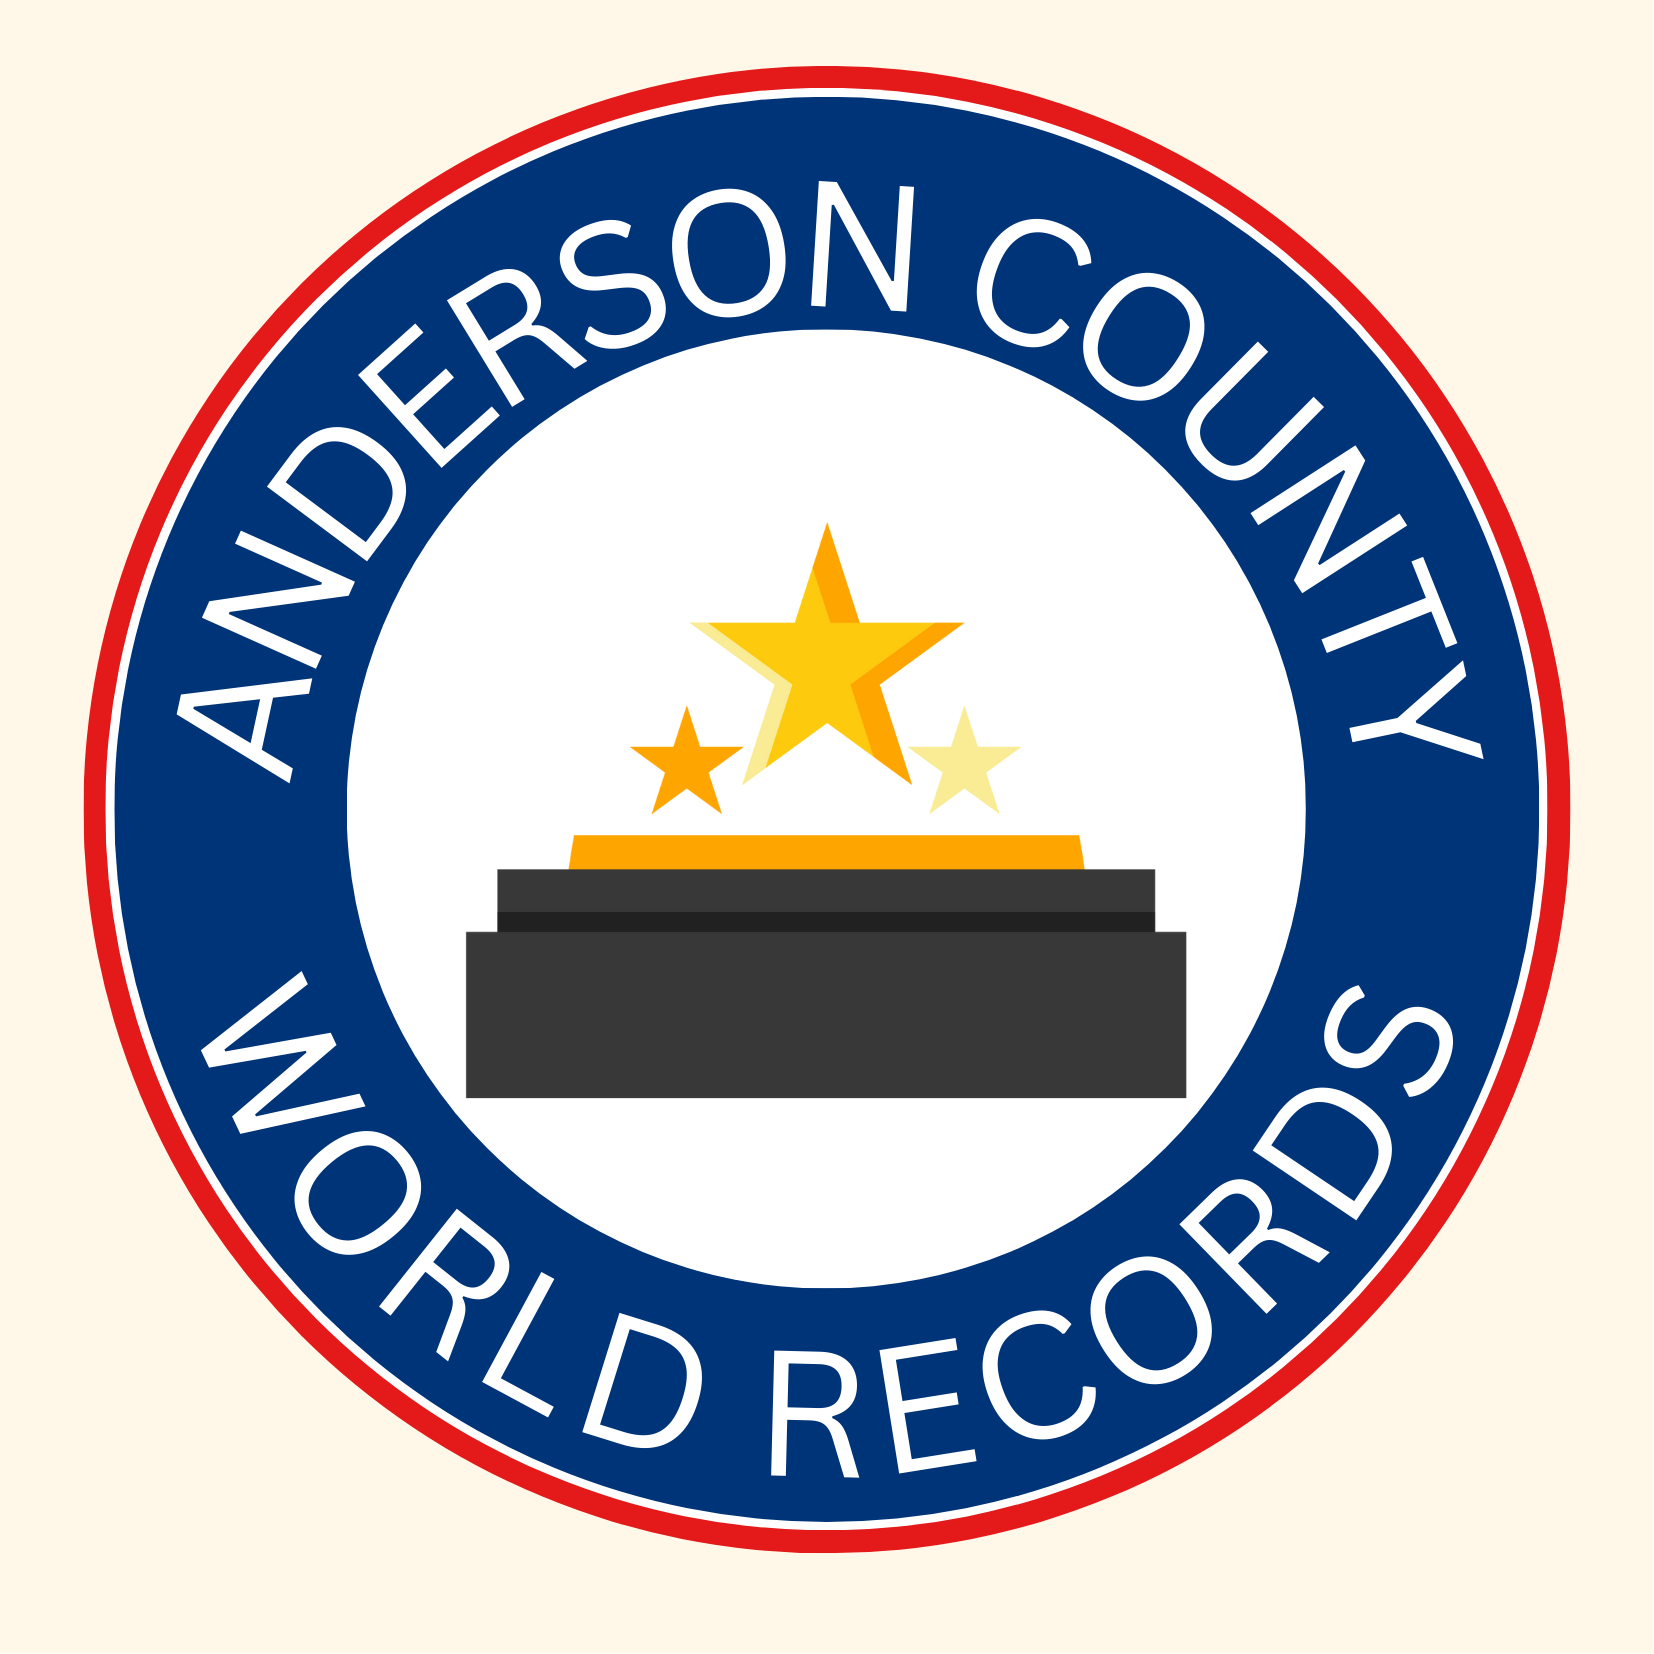 red white blue overlay circles with star trophy in the middle and Anderson County world records around it